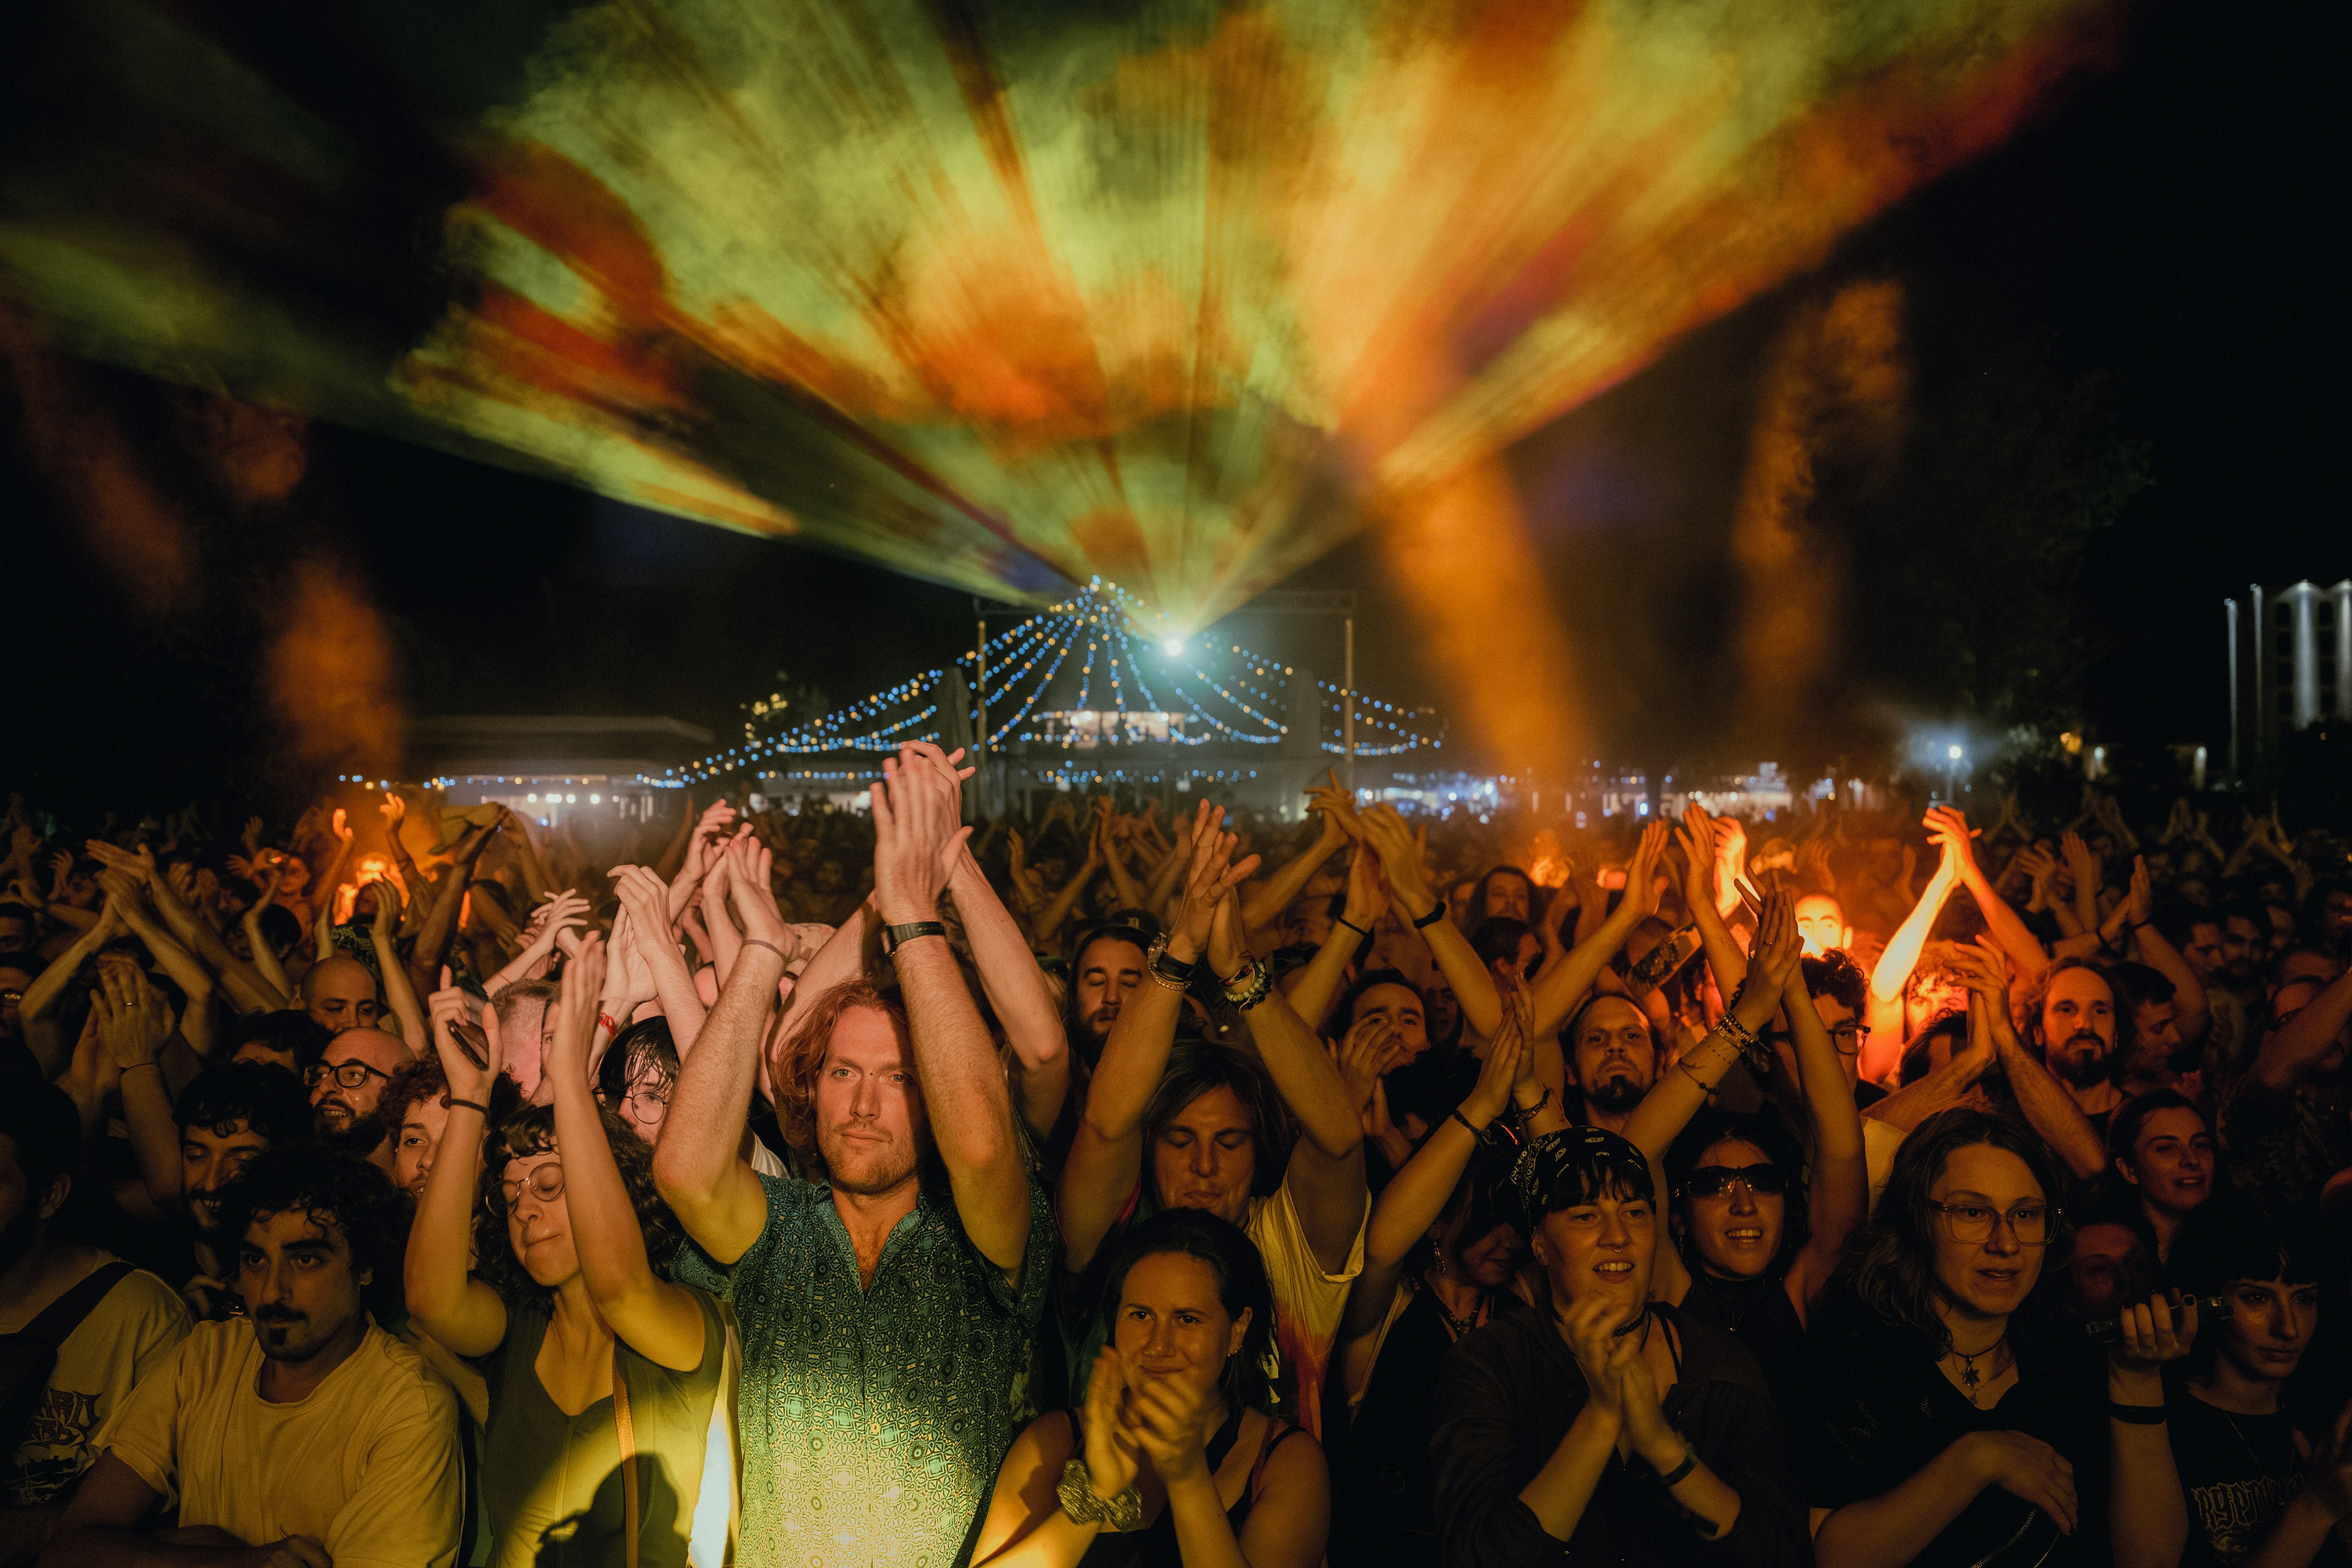 the energetic crowd bathed in stage light with lasers shooting overhead